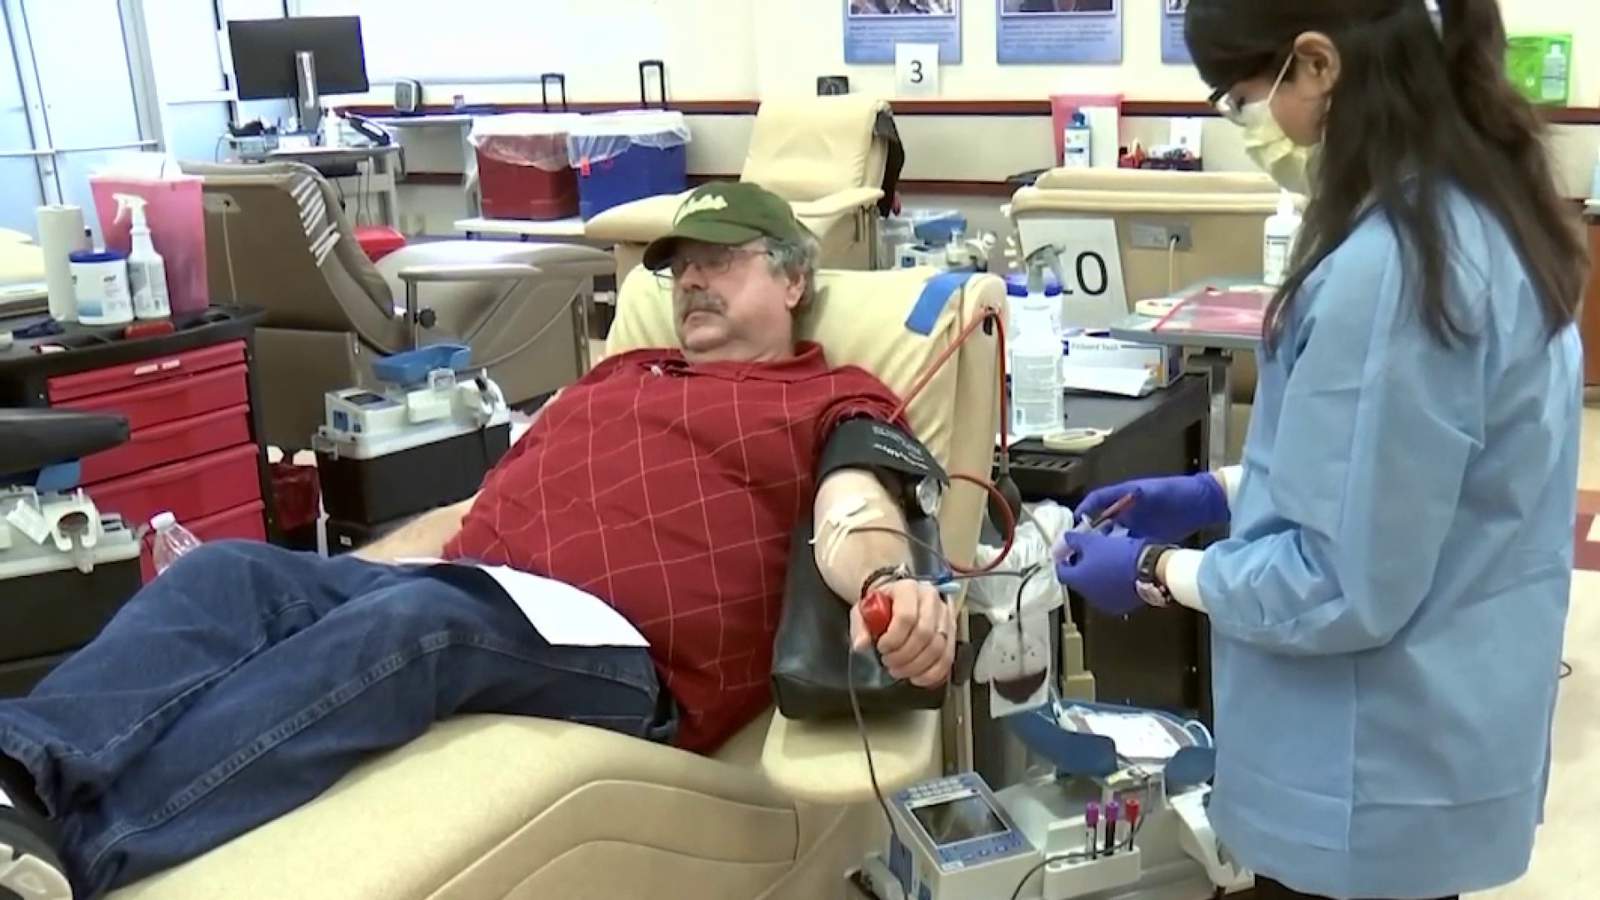 South Texas Blood & Tissue Center asks you to keep appointments to donate